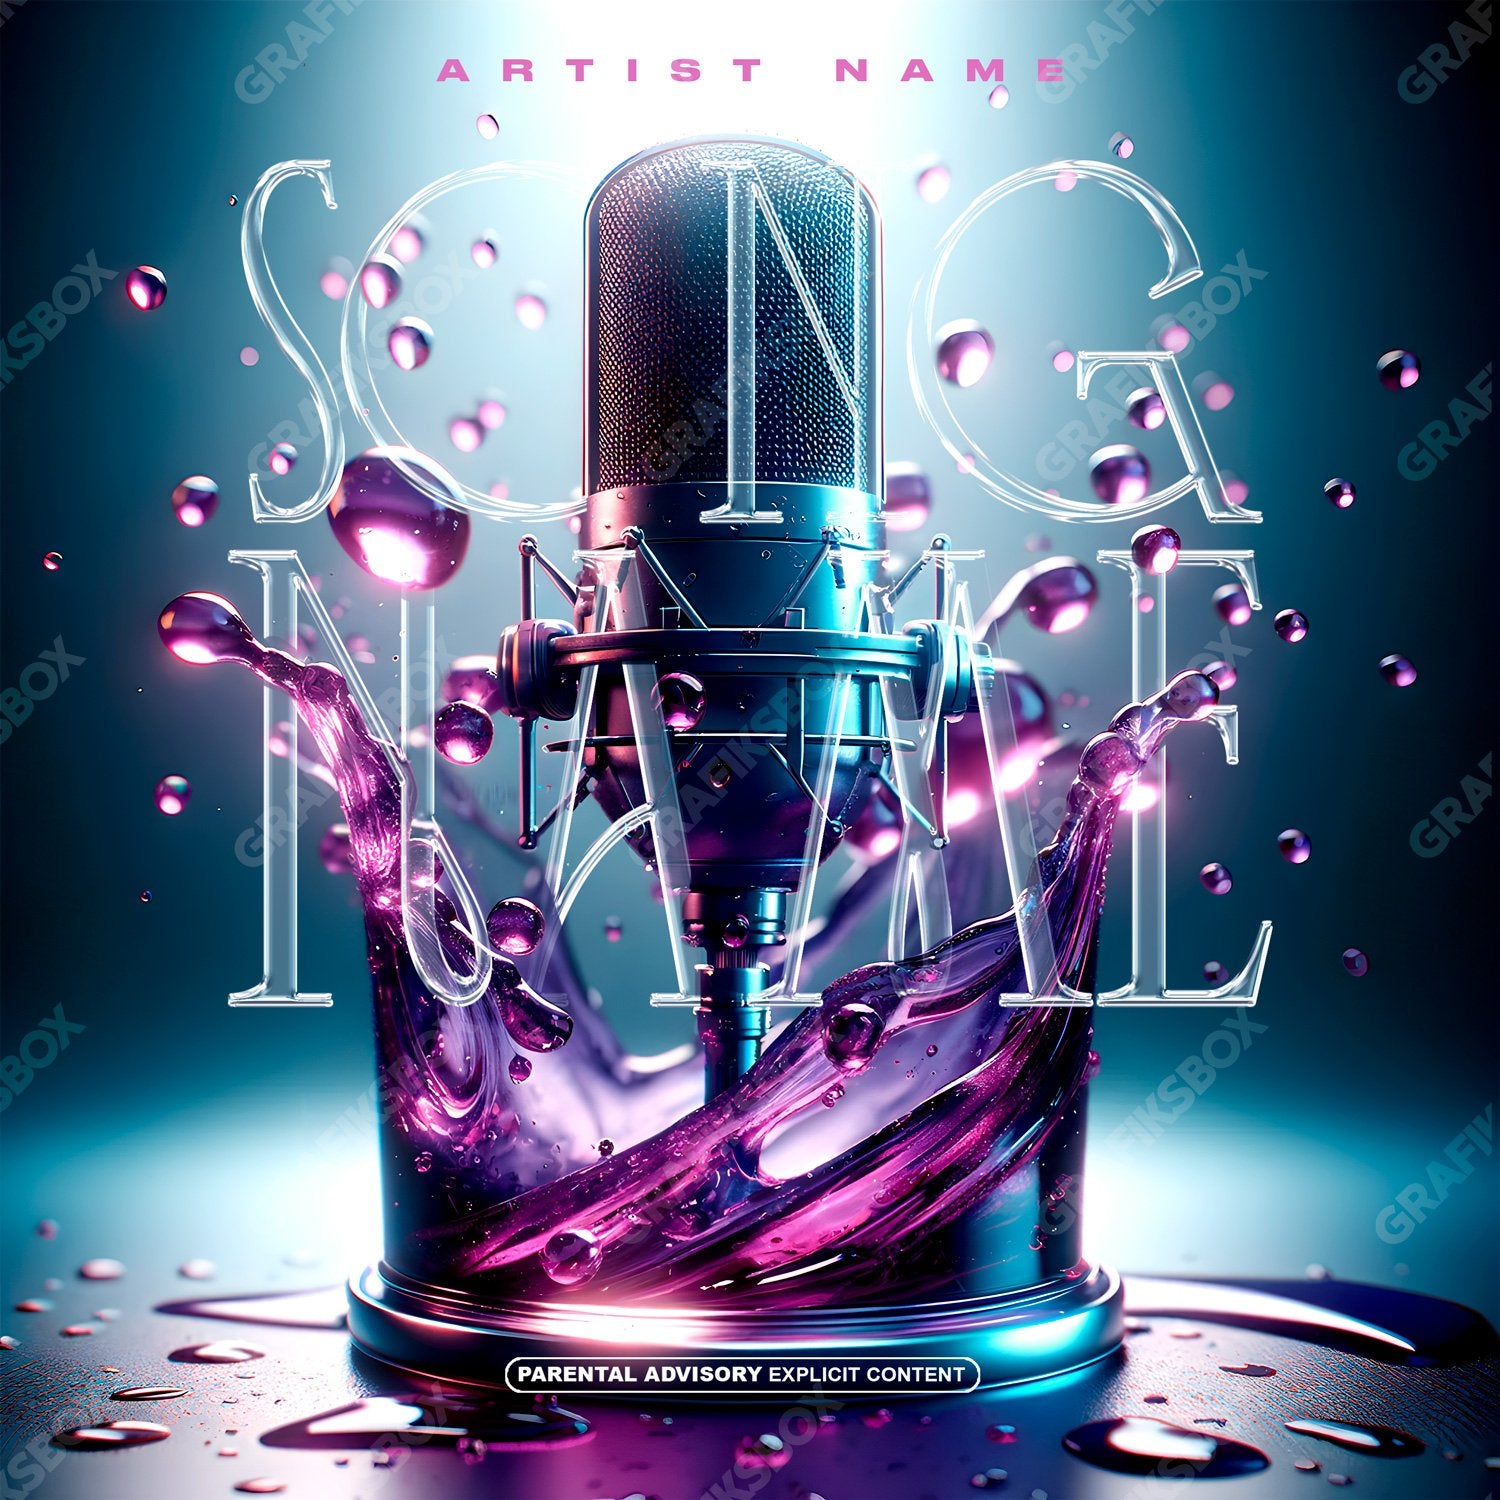 Purple song premade cover art